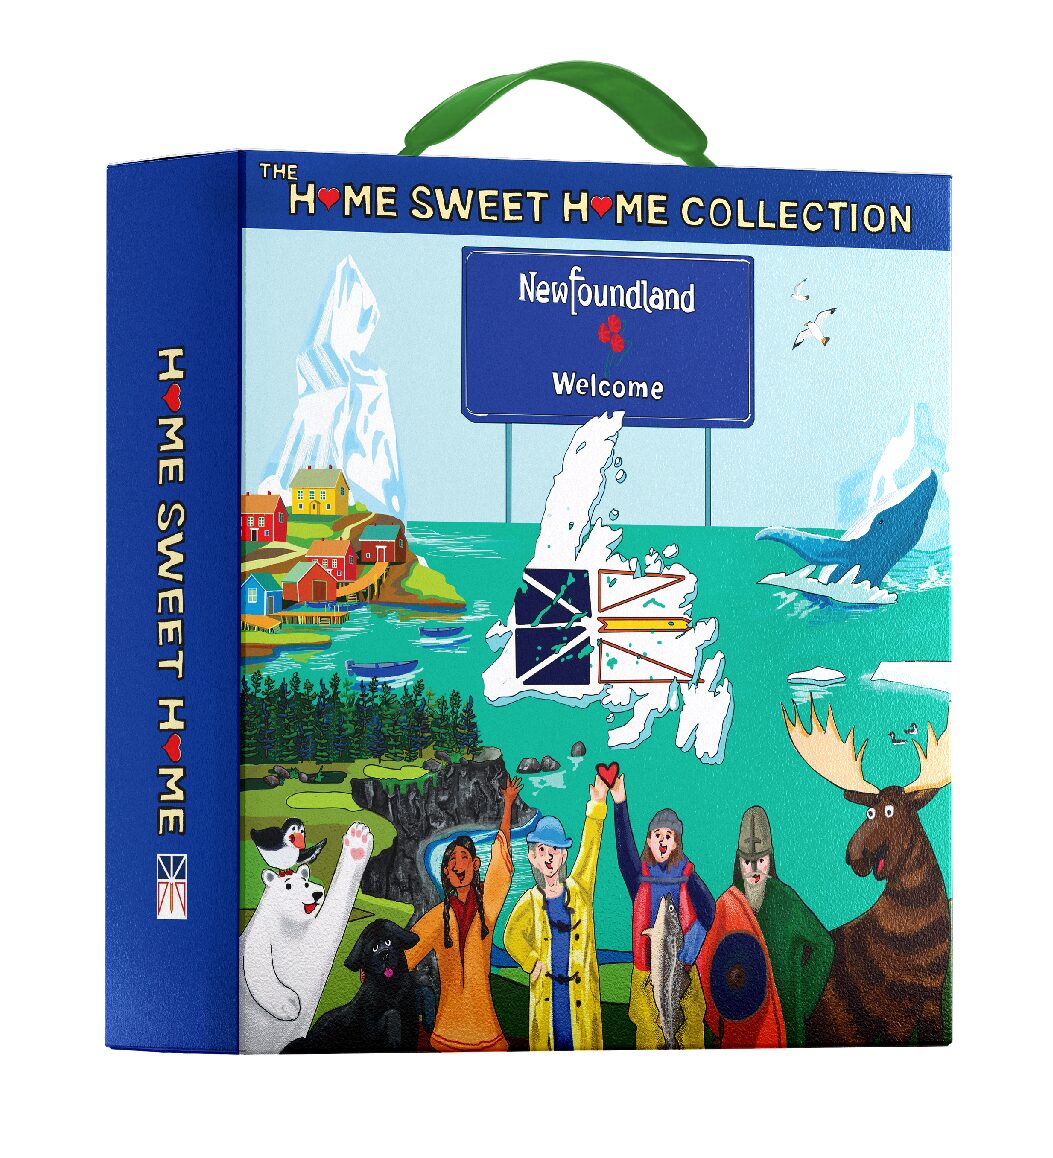 The Home Sweet Home Newfoundland Collection (Box Set)